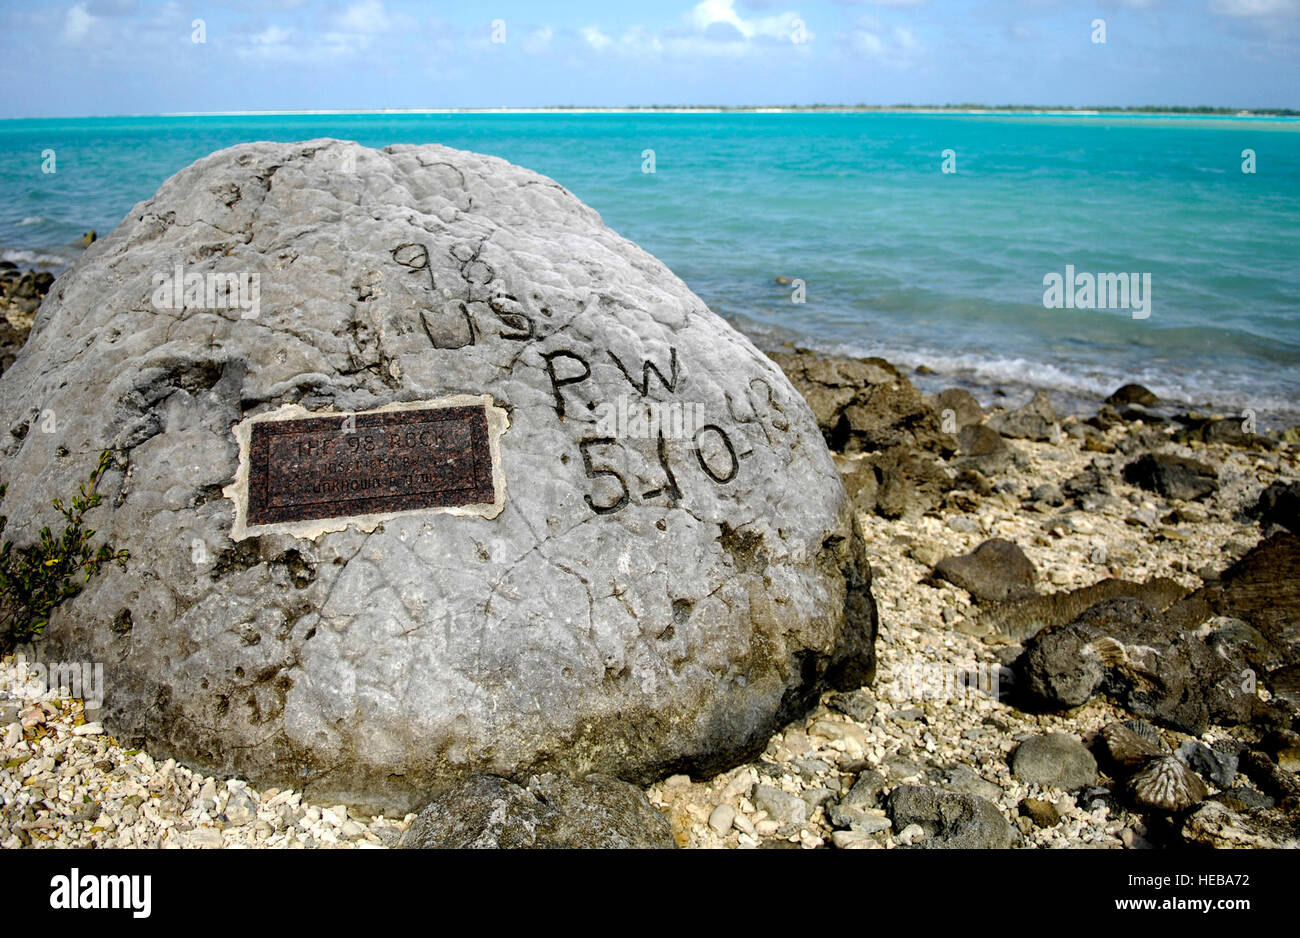 A memorial to prisoners of war is seen Jan. 12 on Wake Island. The '98 Rock' is a memorial for the 98 U.S. civilian contract POWs who were forced by their Japanese captors to rebuild the airstrip as slave labor, then blind-folded and killed by machine gun Oct. 5, 1943. An unidentified prisoner escaped, and chiseled '98 US PW 5-10-43' on a large coral rock near their mass grave, on Wilkes Island at the edge of the lagoon. The prisoner was recaptured and beheaded by the Japanese admiral, who was later convicted and executed for war crimes. Tech. Sgt. Shane A. Cuomo) Stock Photo